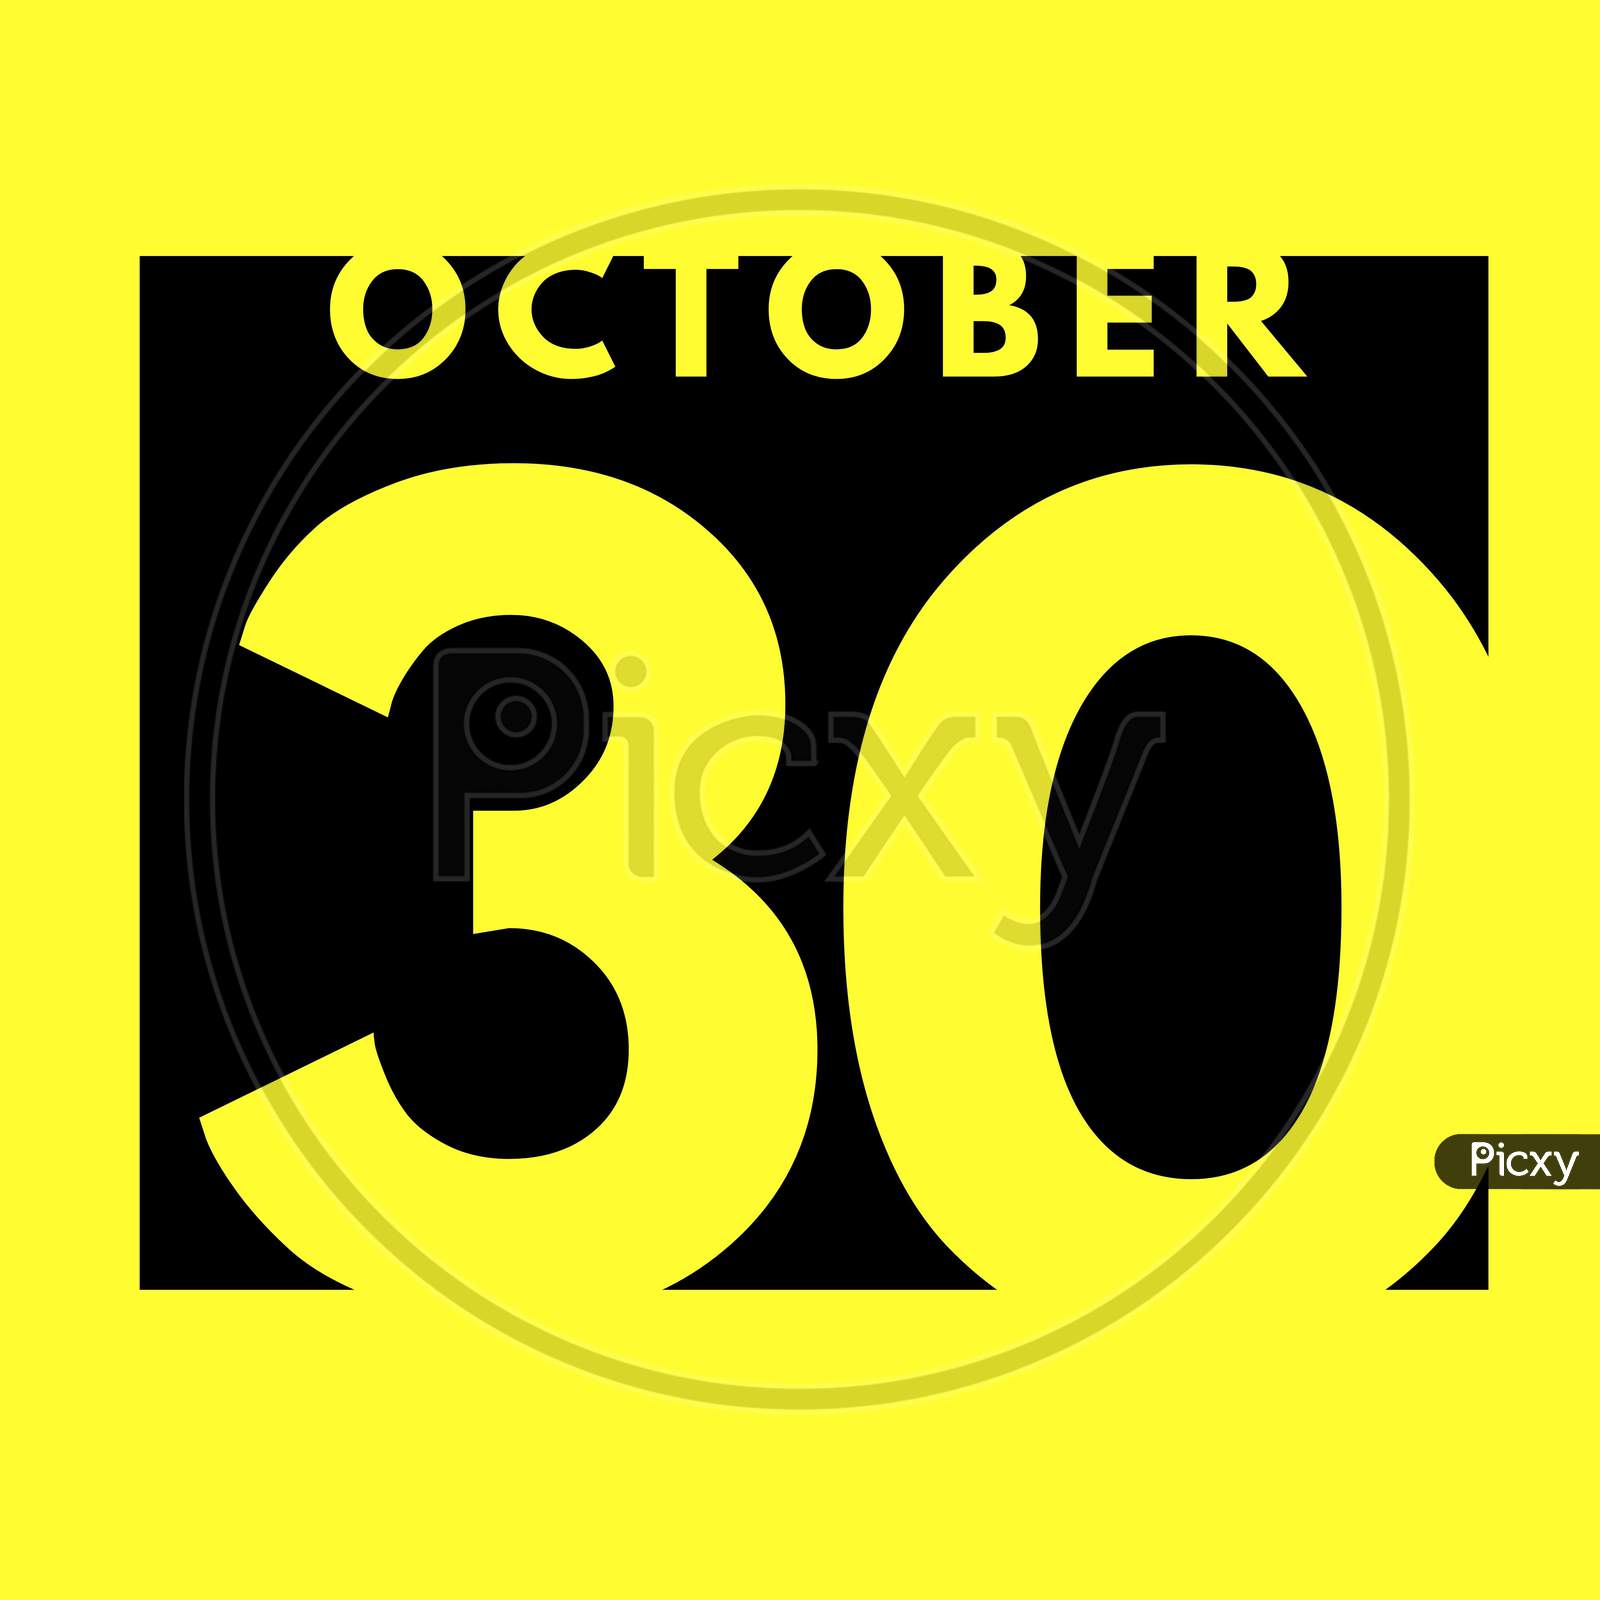 October 30 . Flat Modern Daily Calendar Icon .Date ,Day, Month .Calendar For The Month Of October